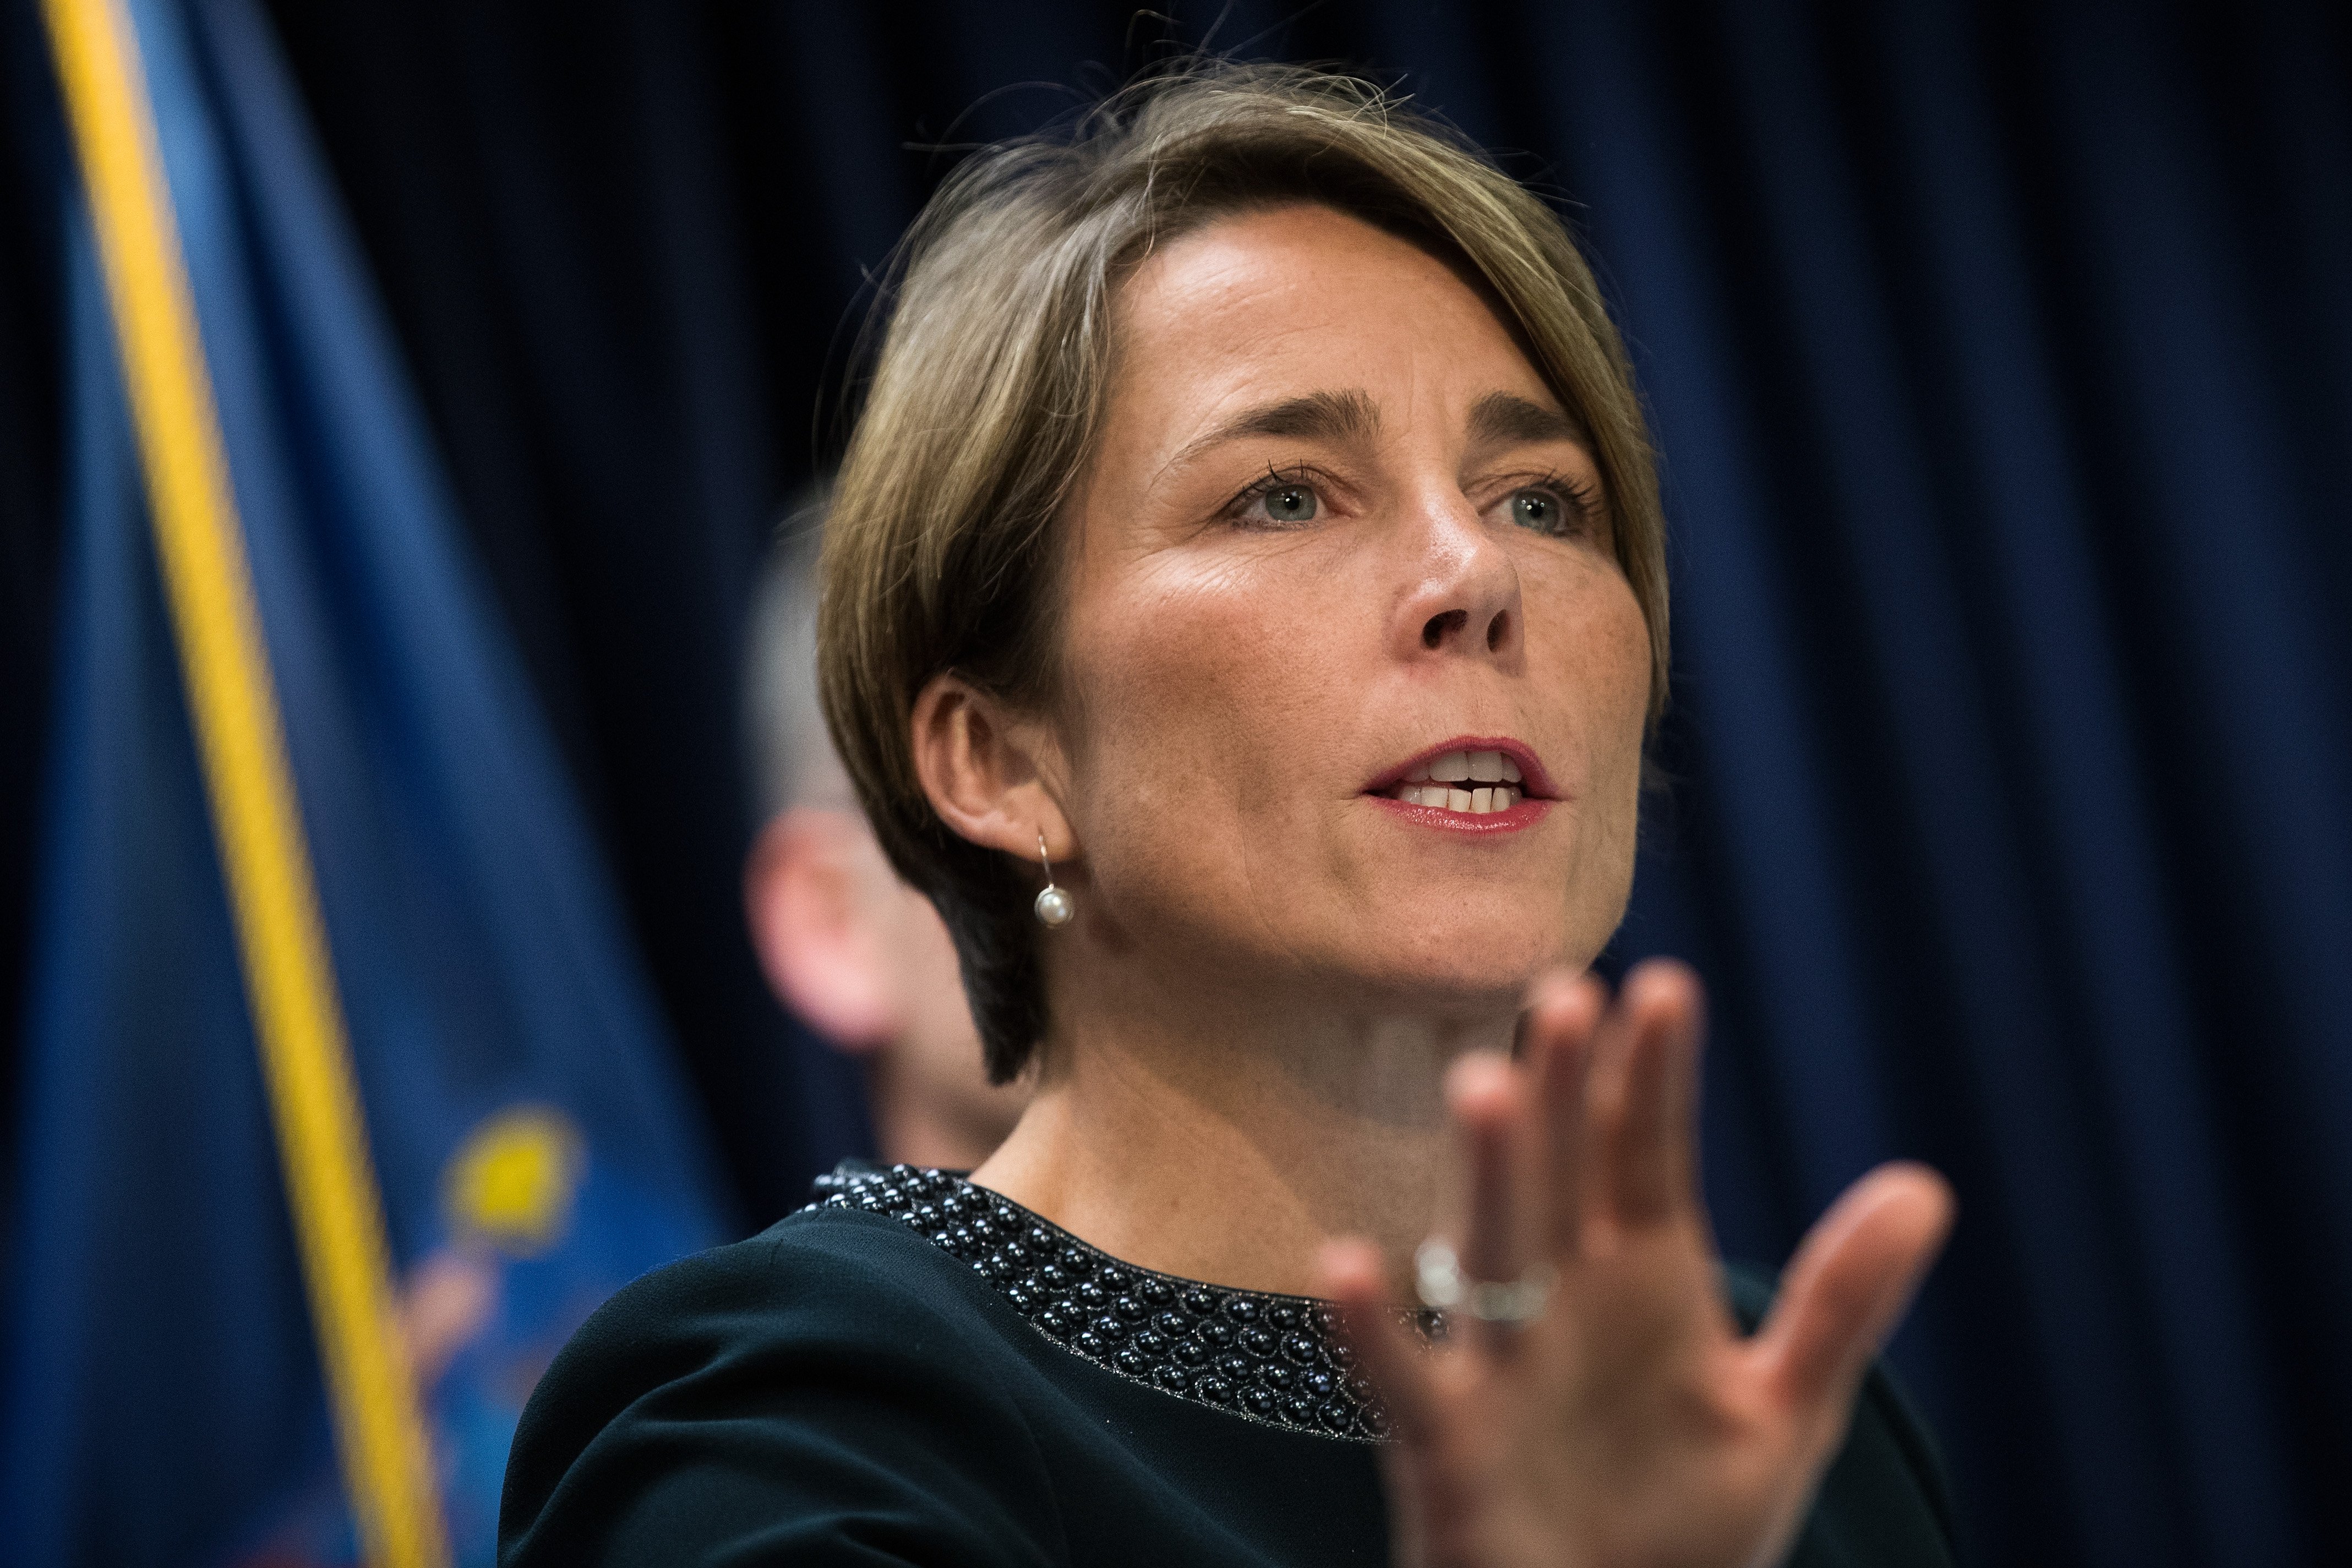 Massachusetts Attorney General Maura Healey speaks during a press conference at the office of the New York Attorney General, July 19, 2016 in New York City. (Photo by Drew Angerer/Getty Images)